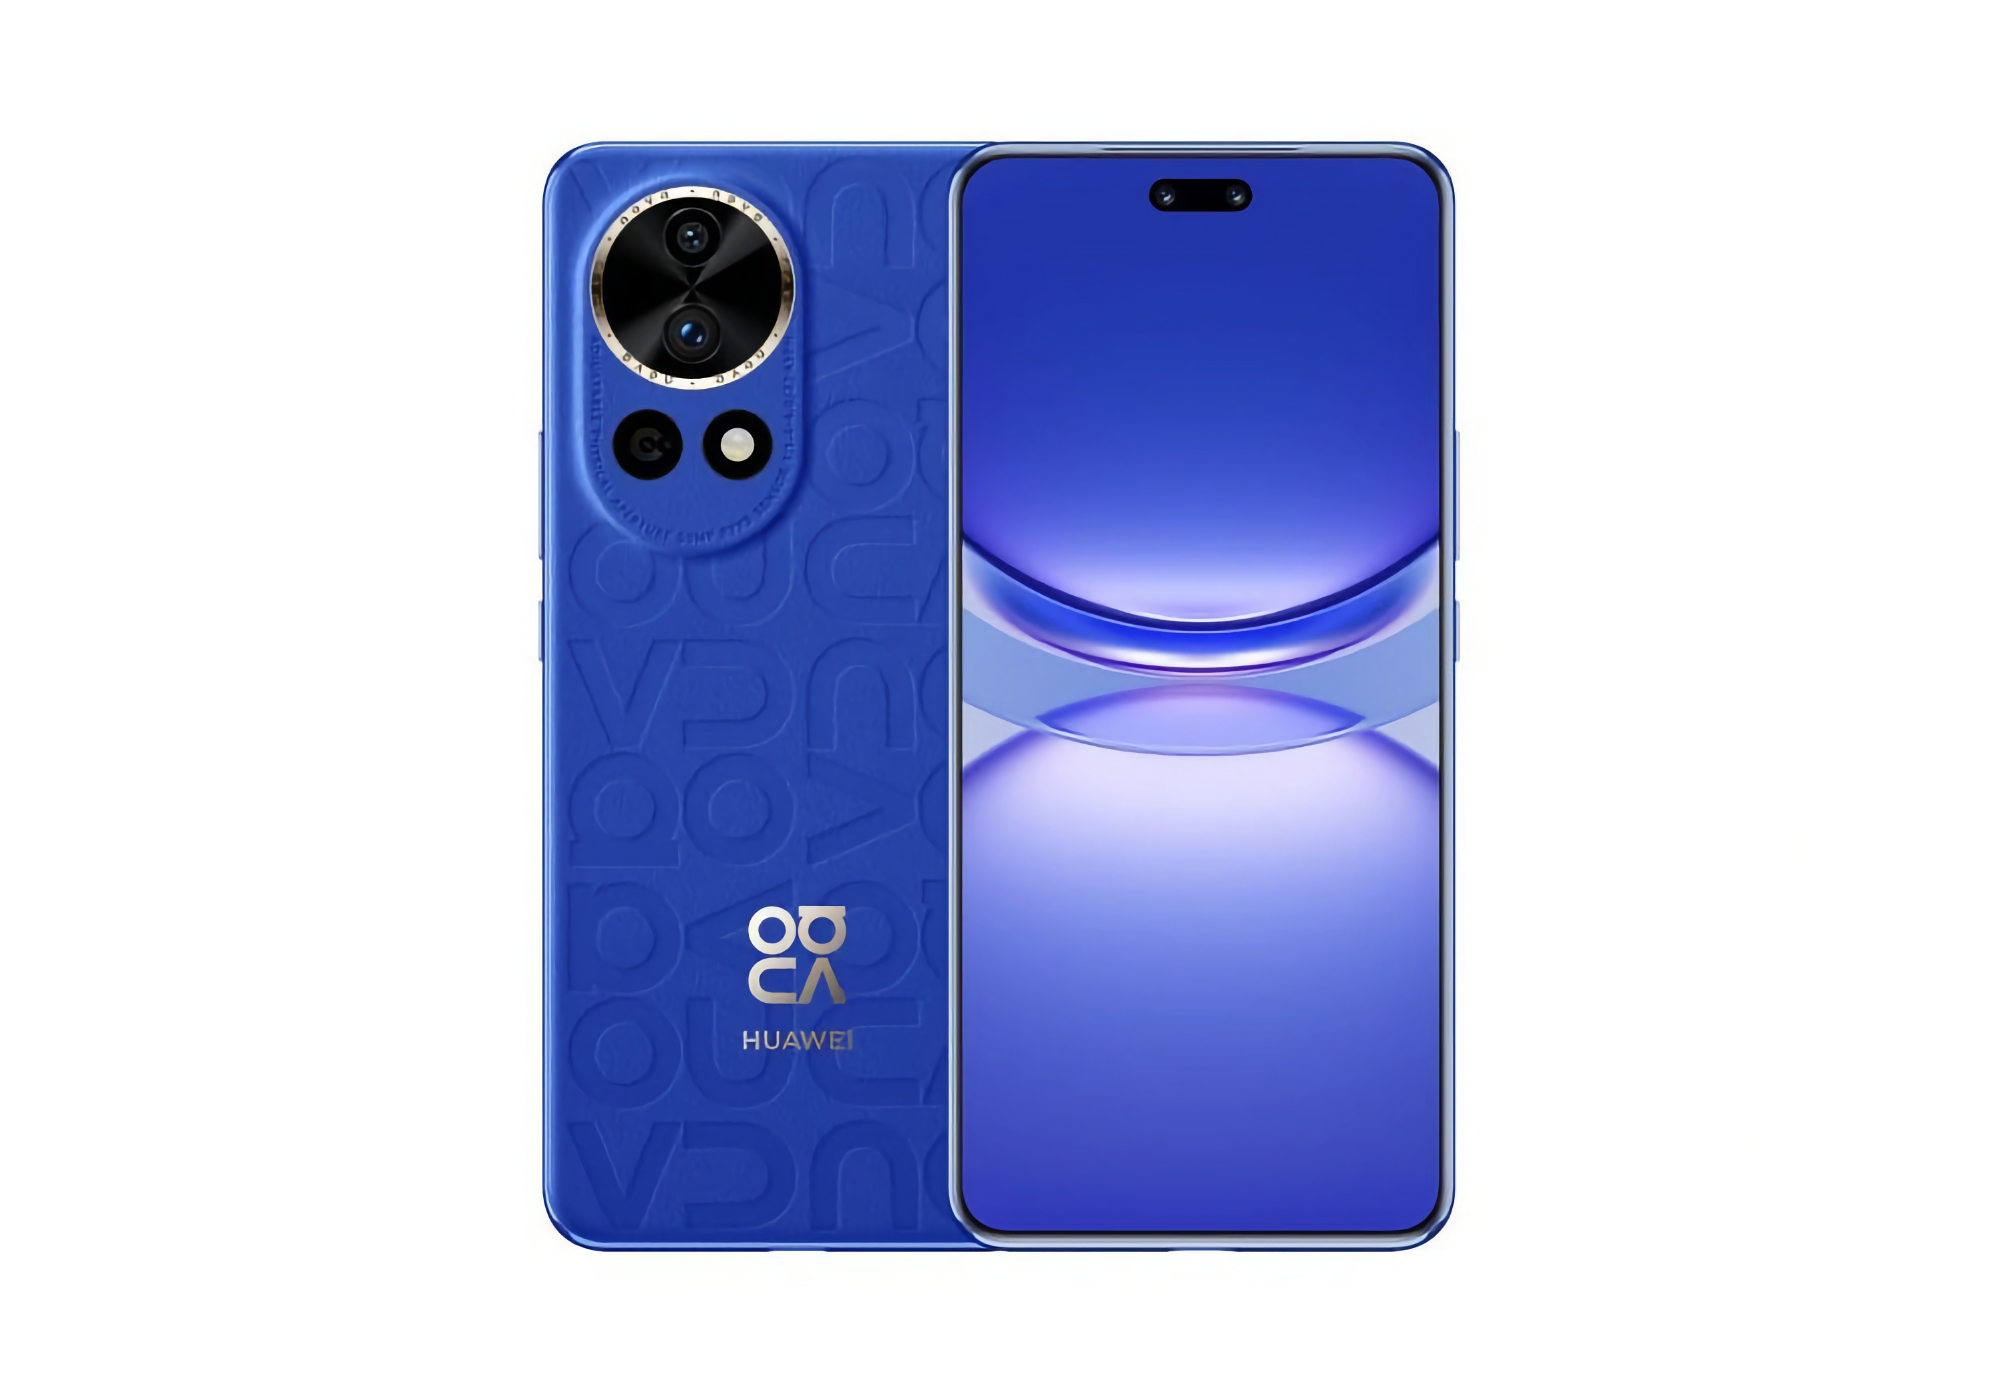 Huawei unveiled the Nova 12 Pro and Nova 12 Ultra: smartphones with Kirin chips, satellite connectivity and variable aperture support